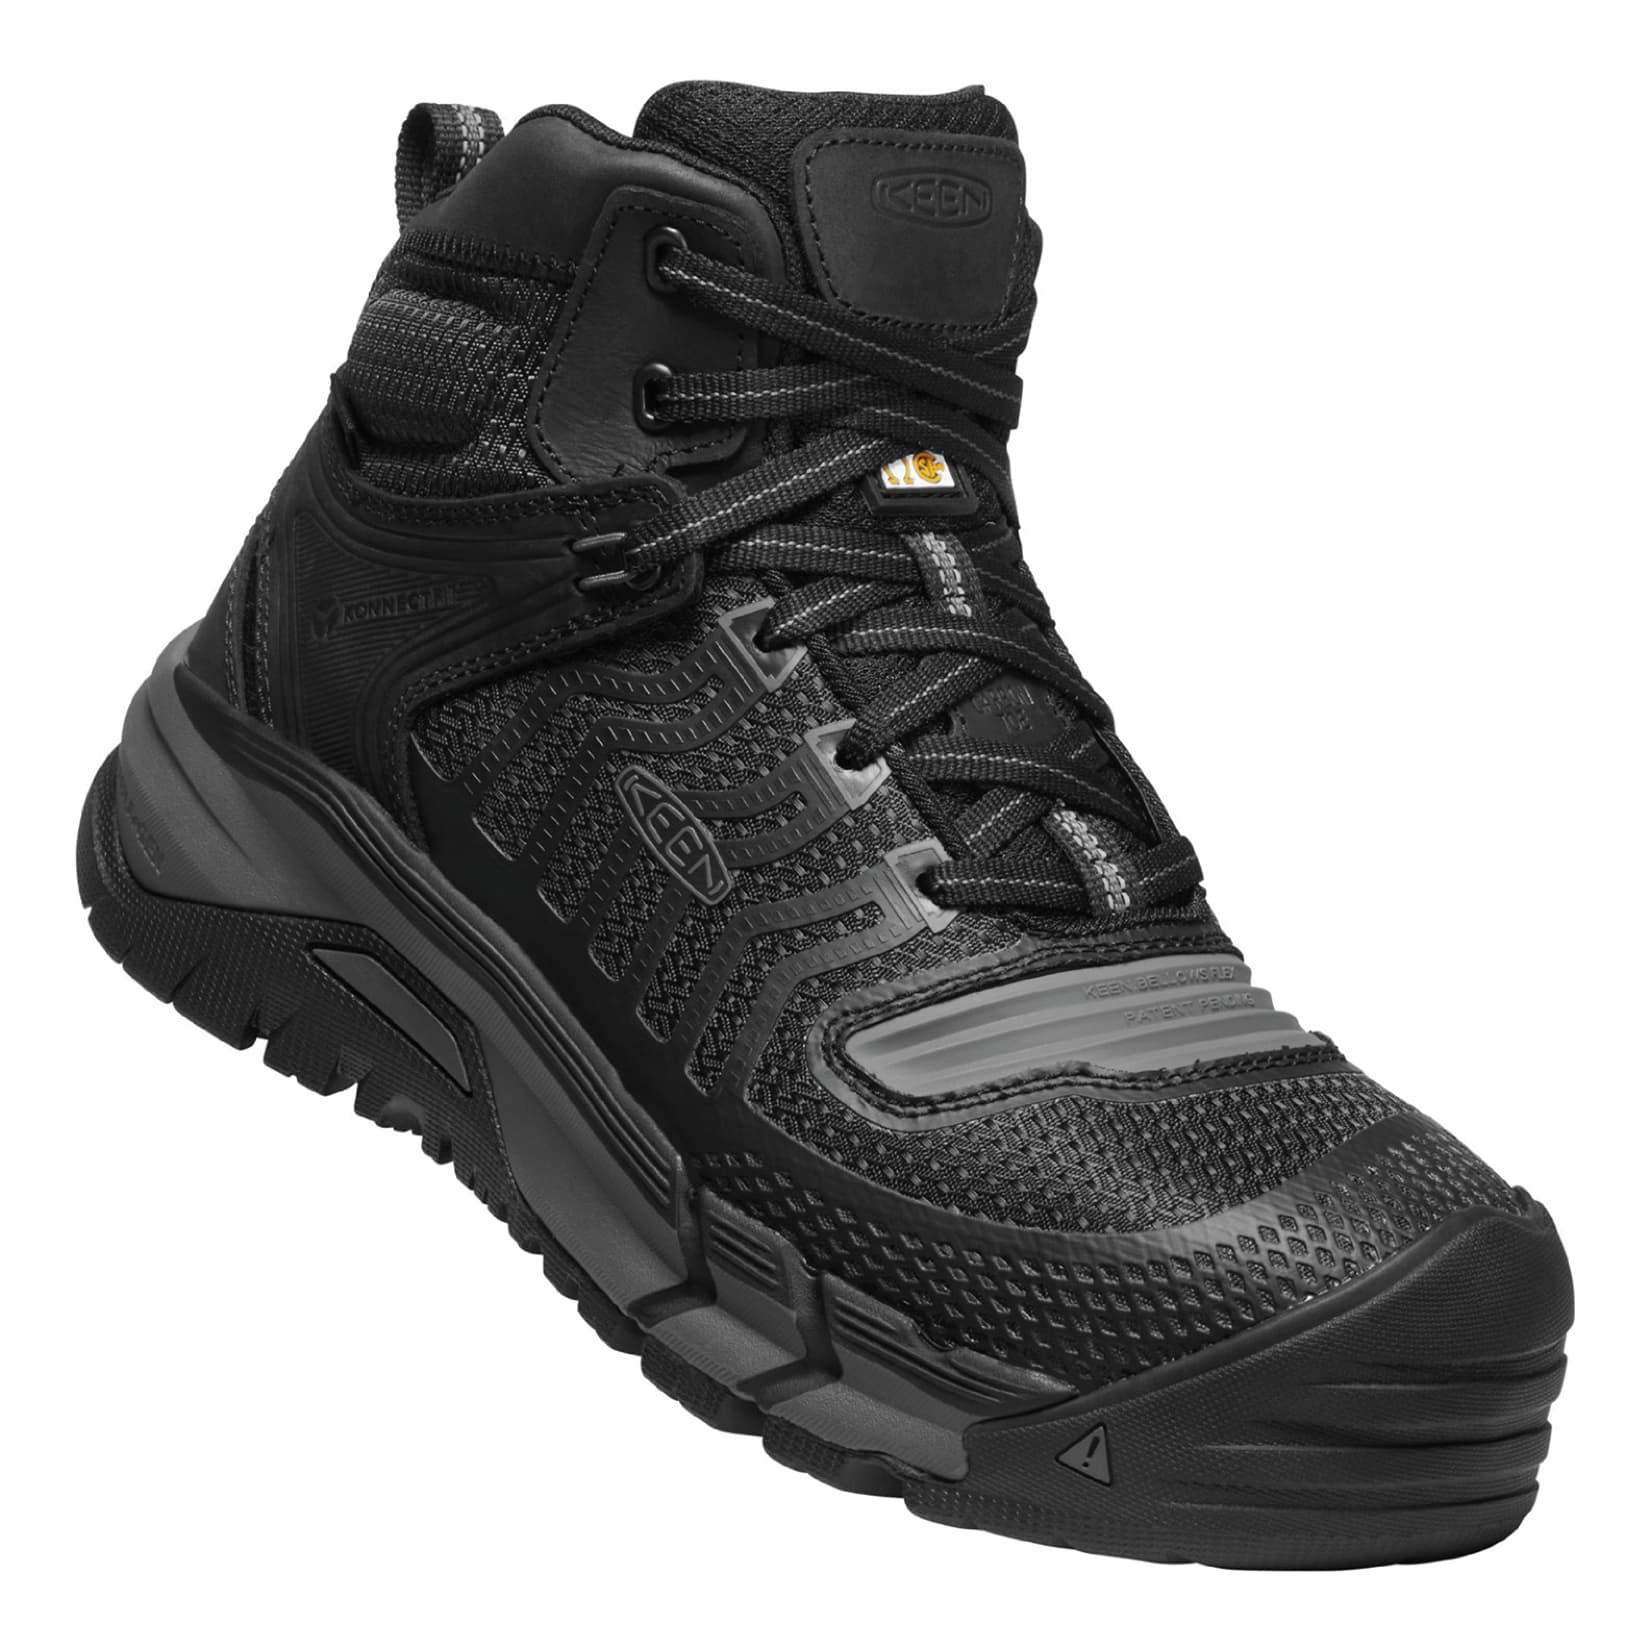  Under Armour Men's Stellar G2 6 Side Zip Lace Up Boot, (001)  Black/Black/Pitch Gray, 8